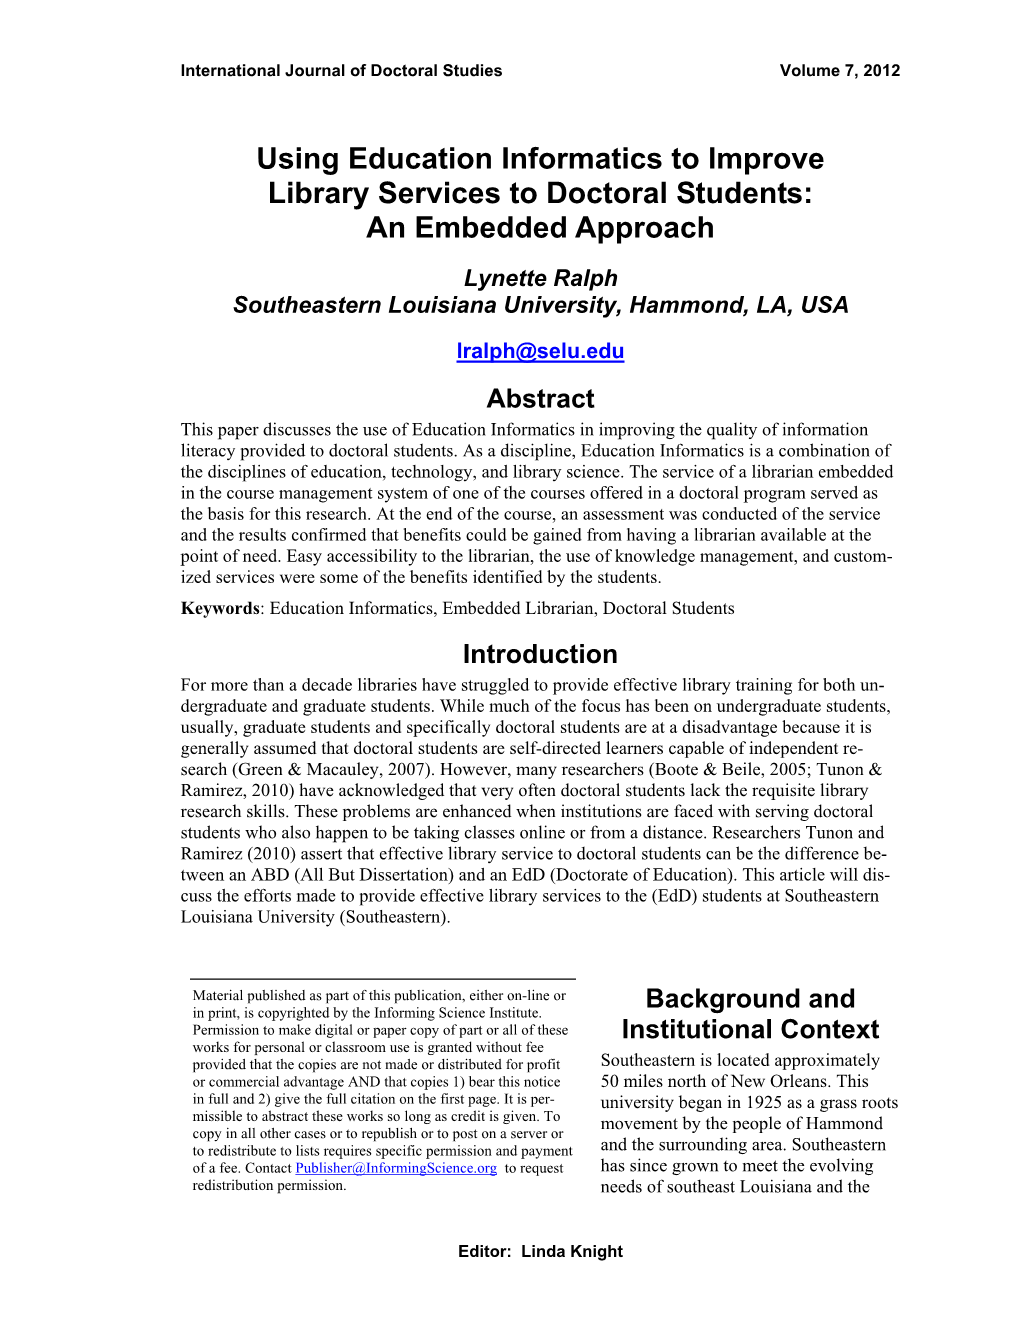 Using Education Informatics to Improve Library Services to Doctoral Students: an Embedded Approach